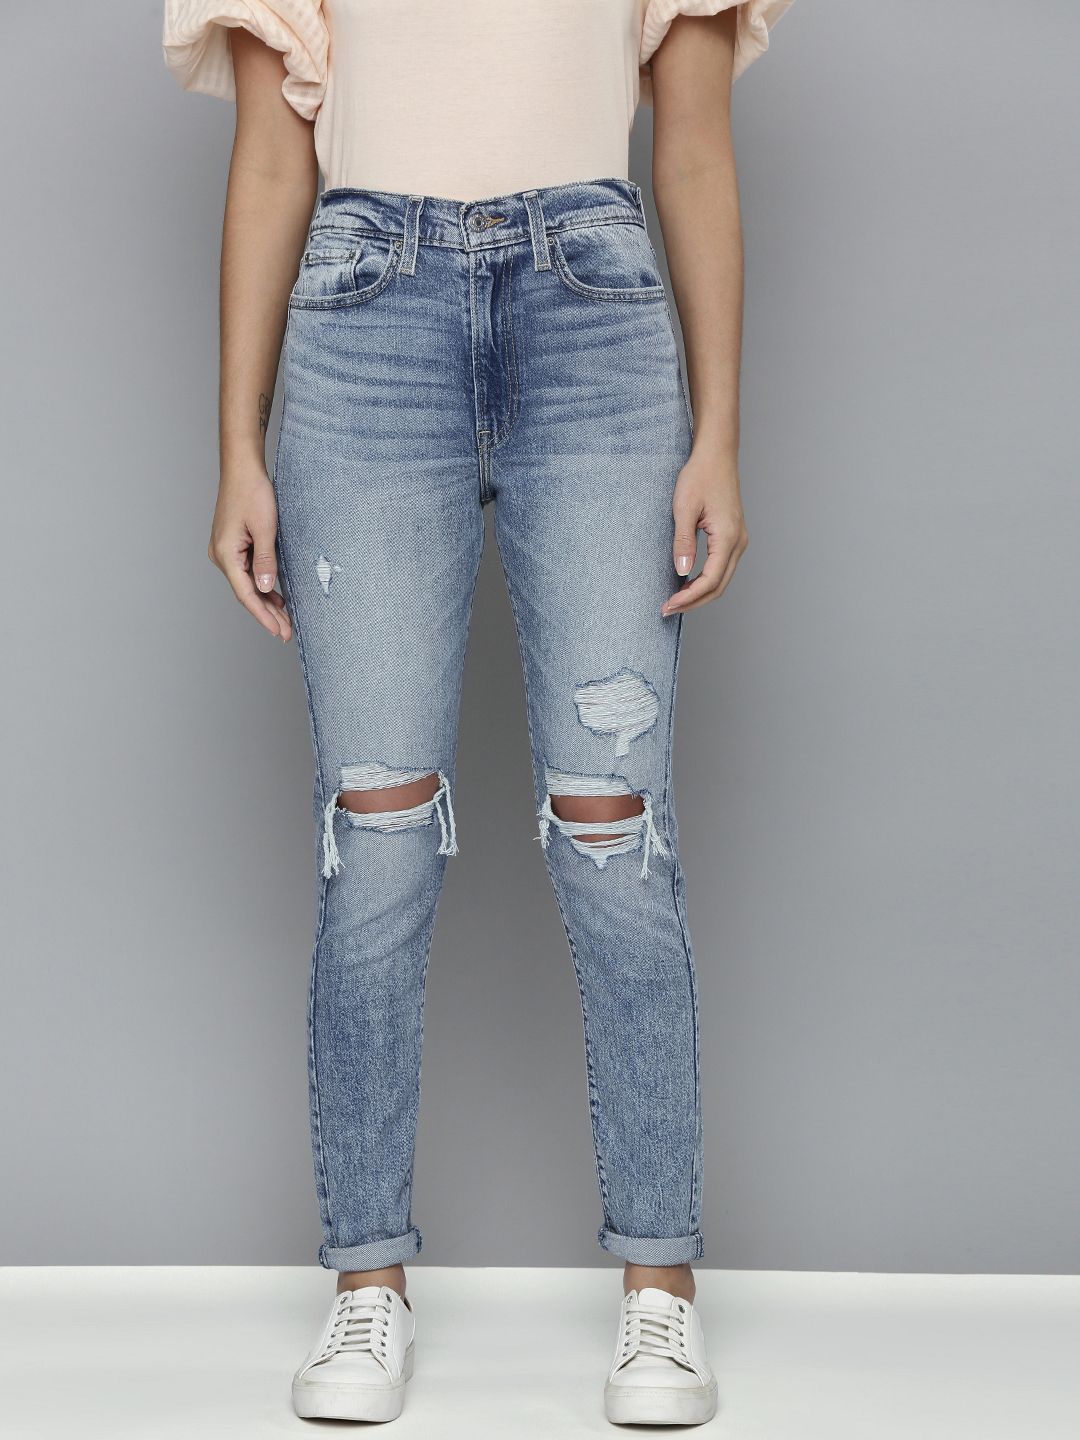 Levis Women Blue Skinny Fit Highly Distressed Light Fade Stretchable Jeans Price in India